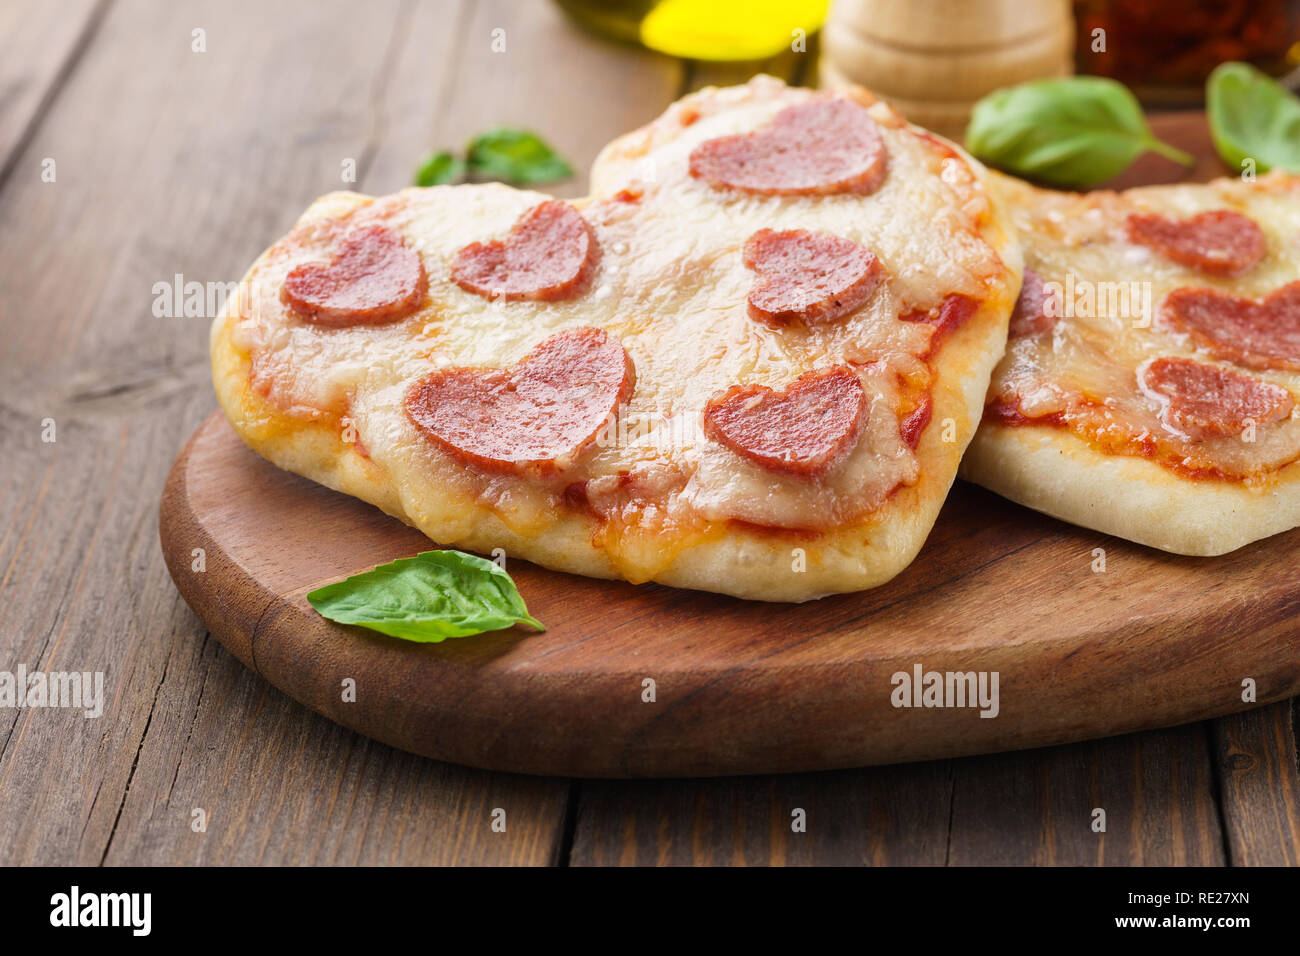 Mini pizzas - Fresh homemade heart shaped mini pizzas with pepperoni, cheese, tomatoes and basil. Wooden board. Stock Photo